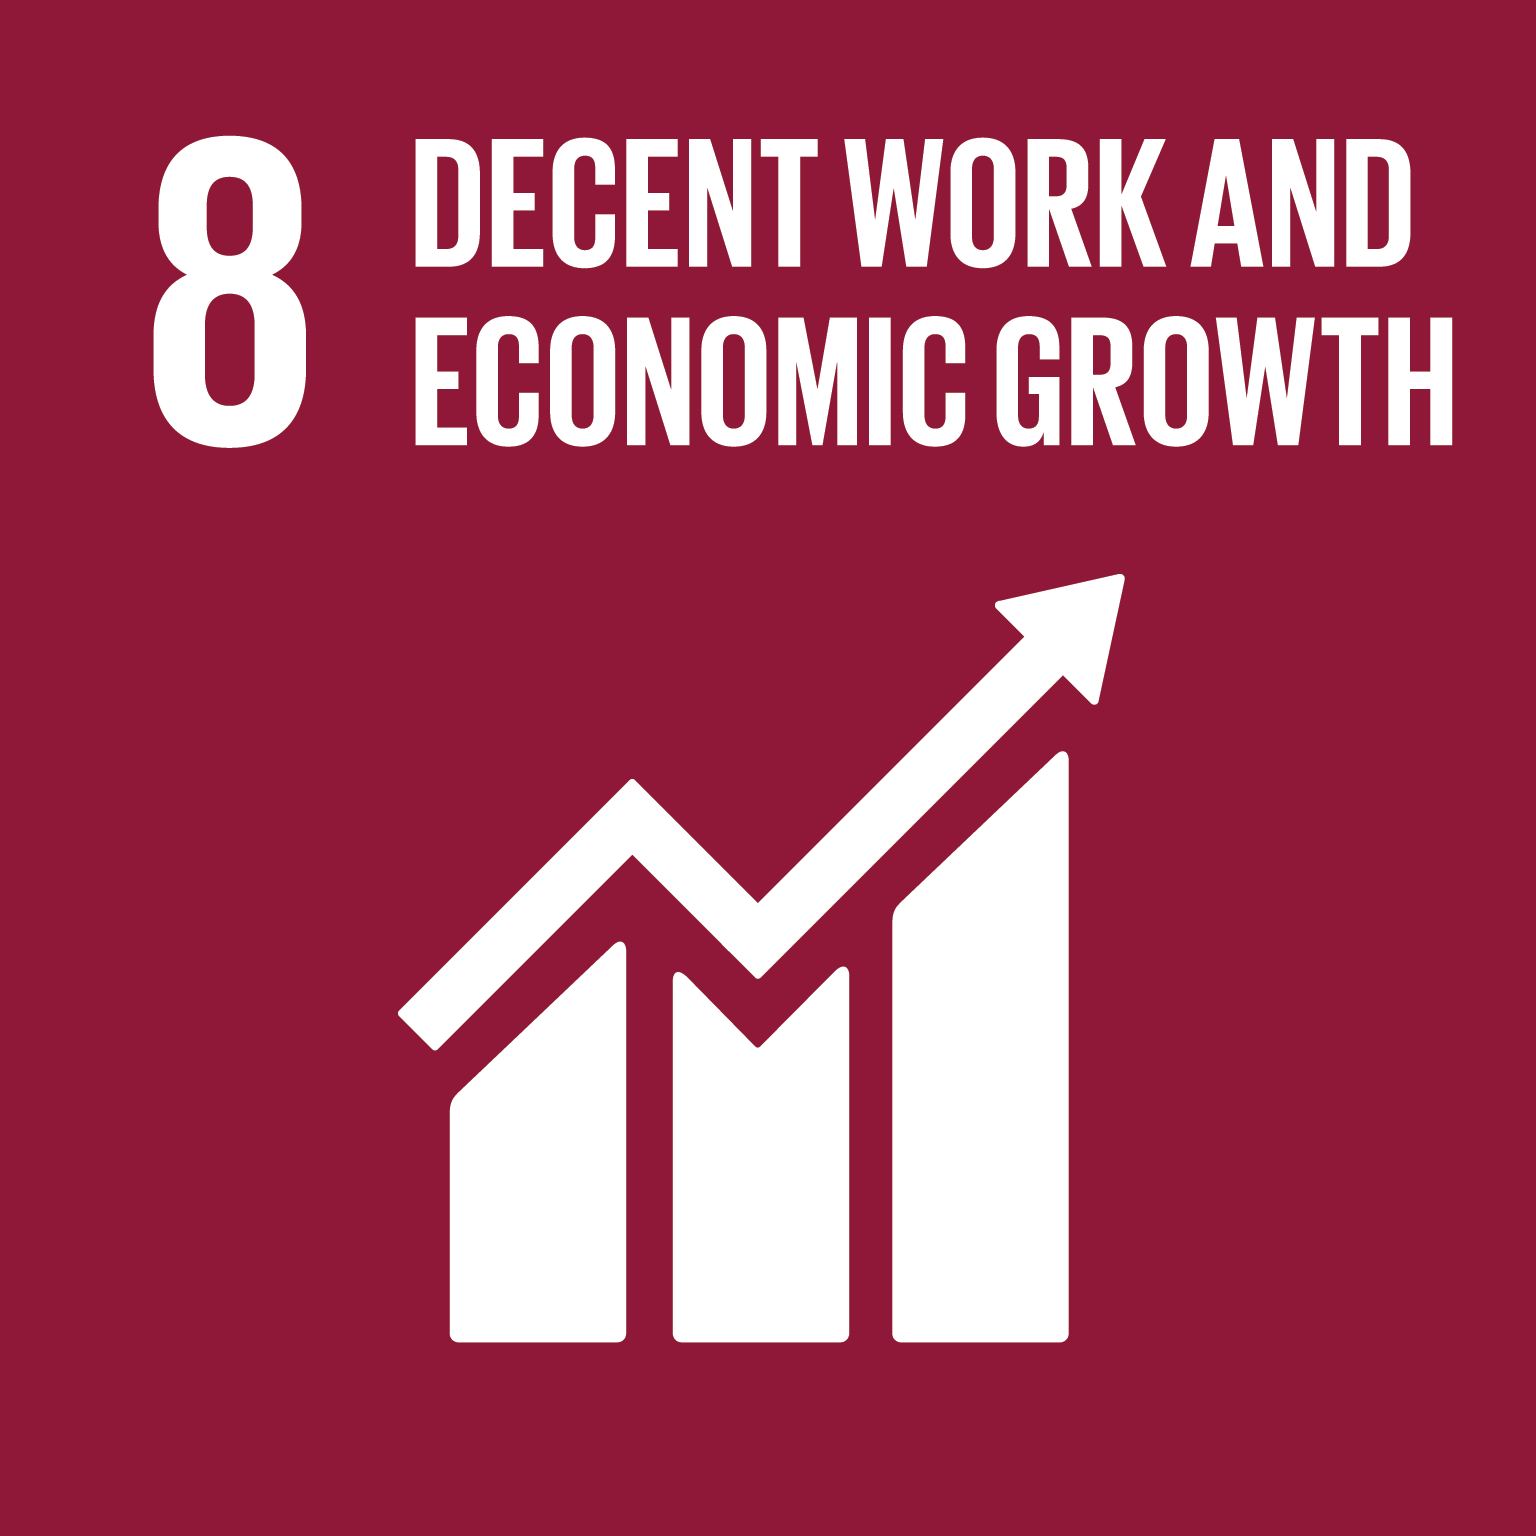 Goal 8 Department Of Economic And Social Affairs